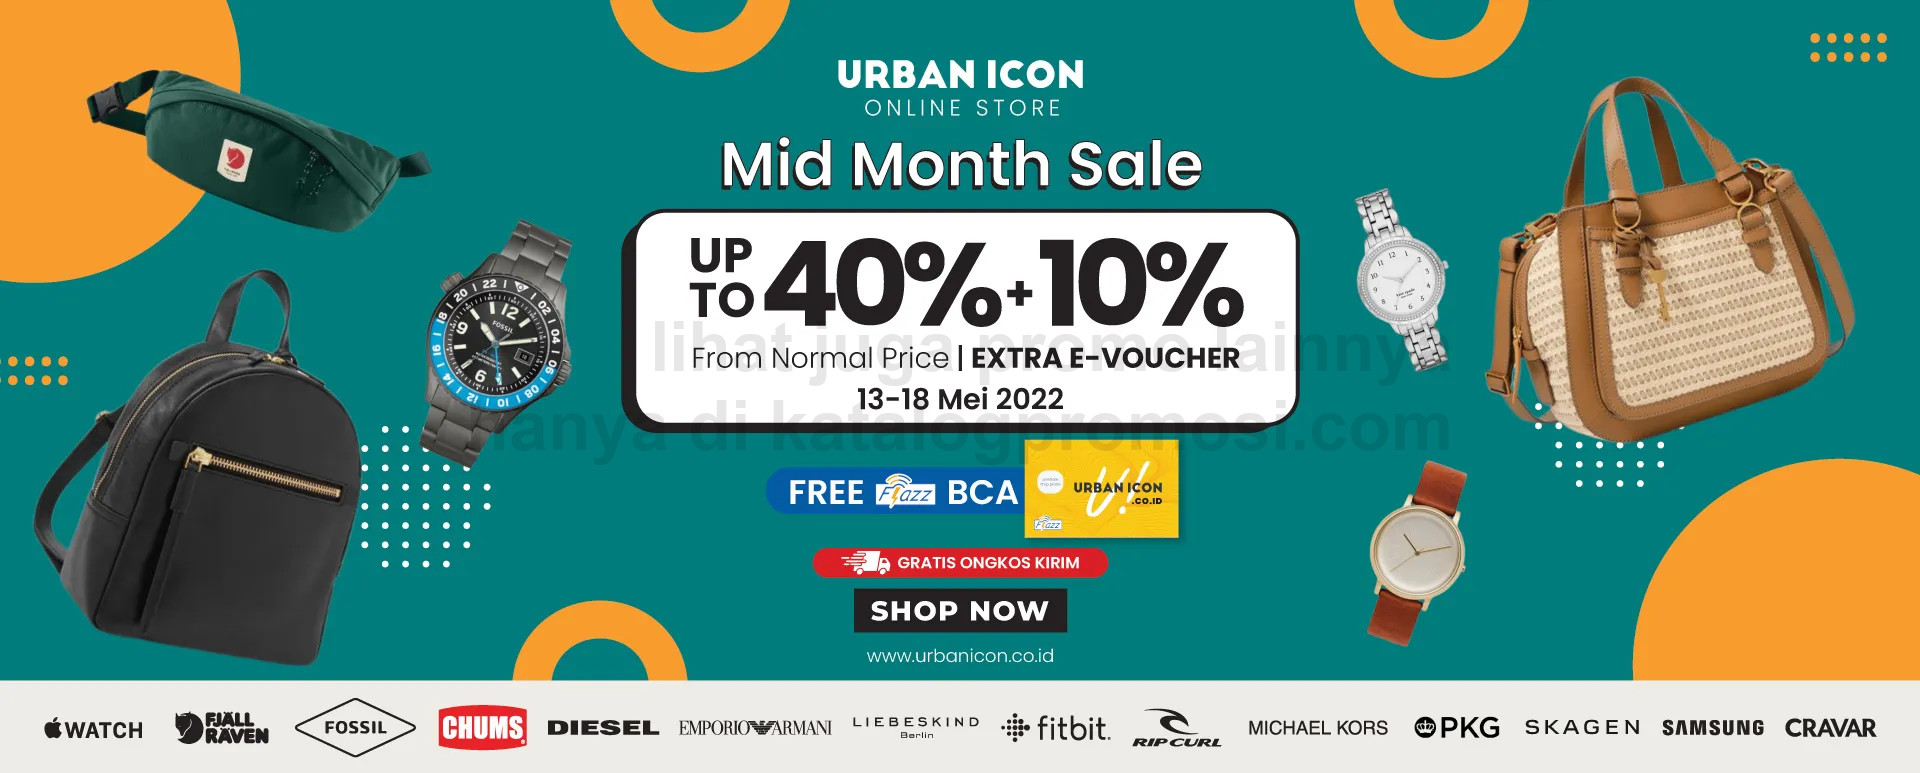 Promo URBAN ICON MID MONTH SALE - Discount Up To 40% Off* + 10% off